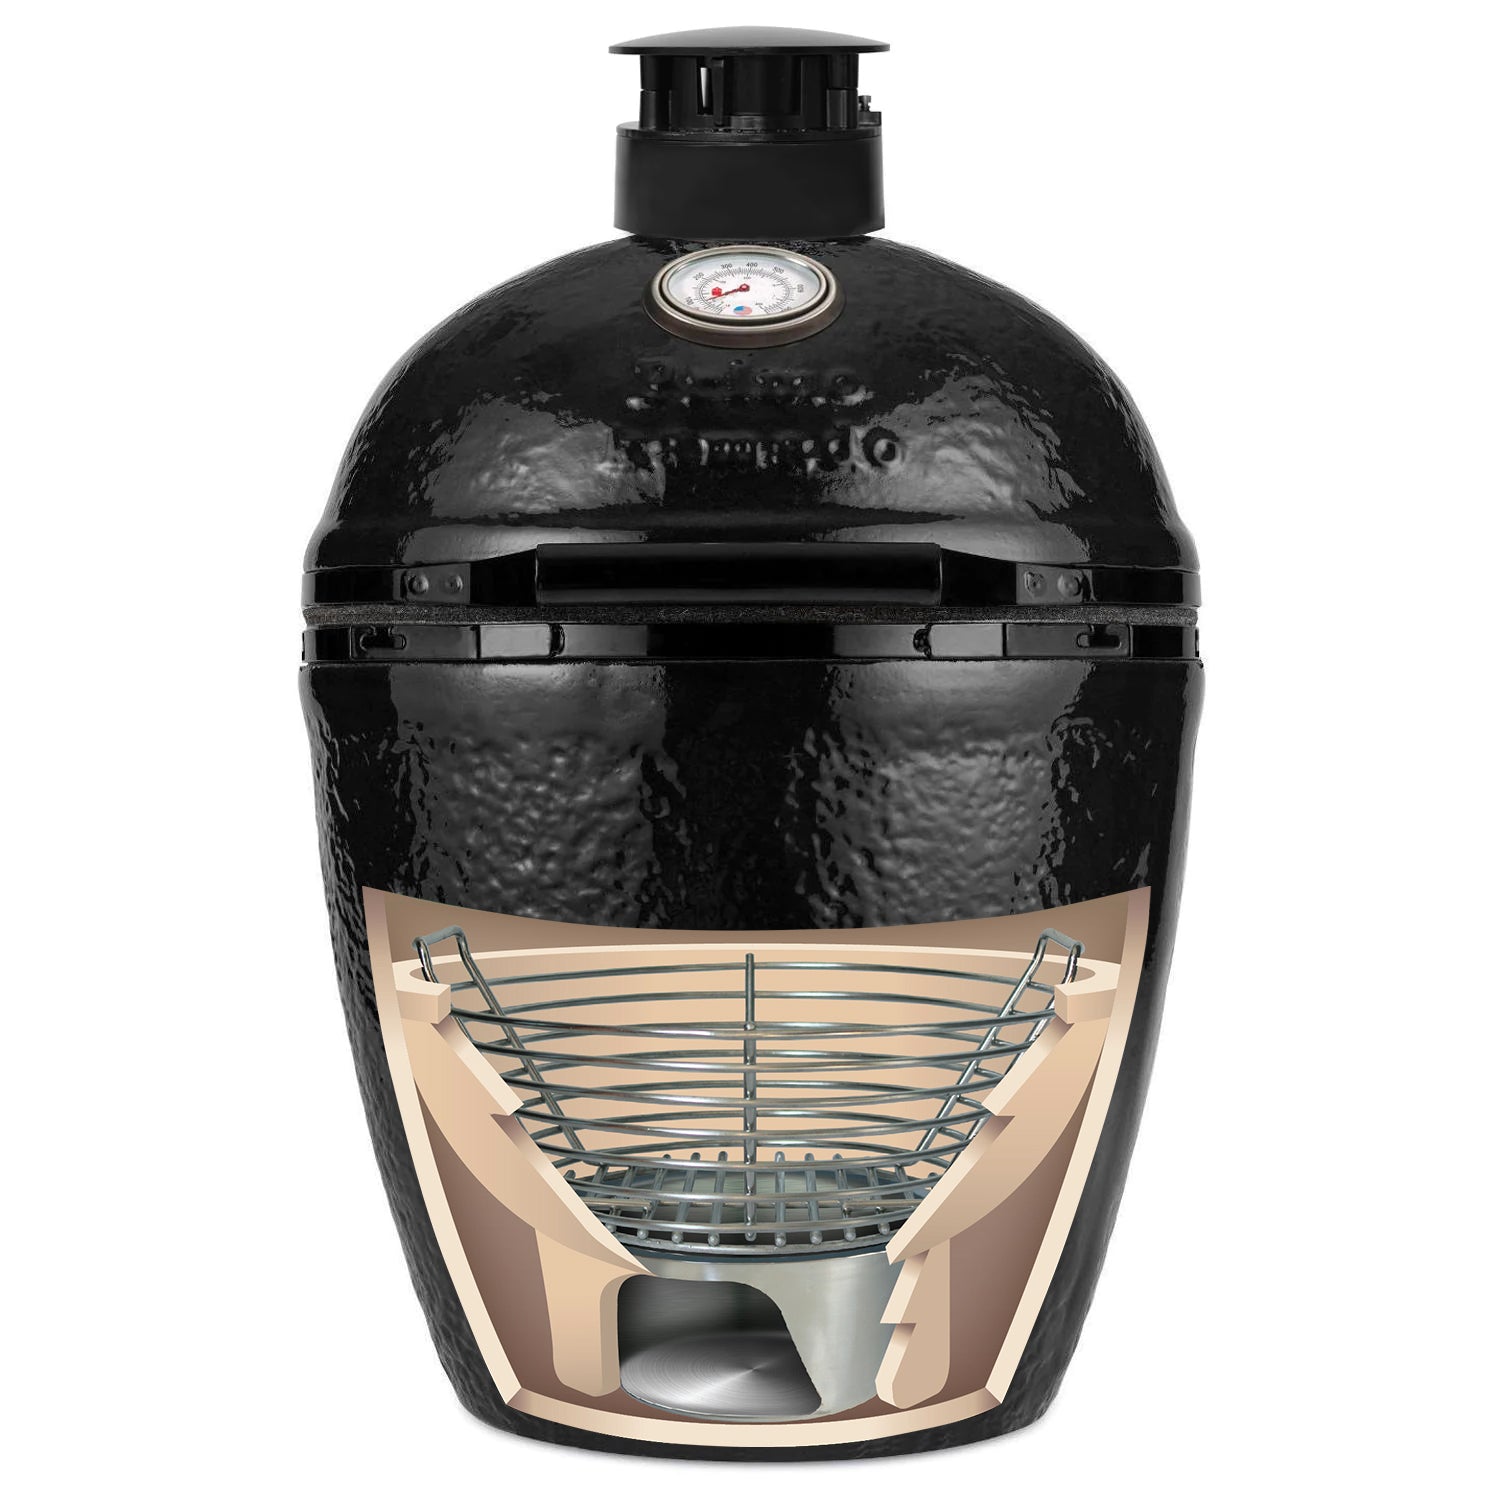 Kamado cut out showing location of Kick Ash Basket and Can